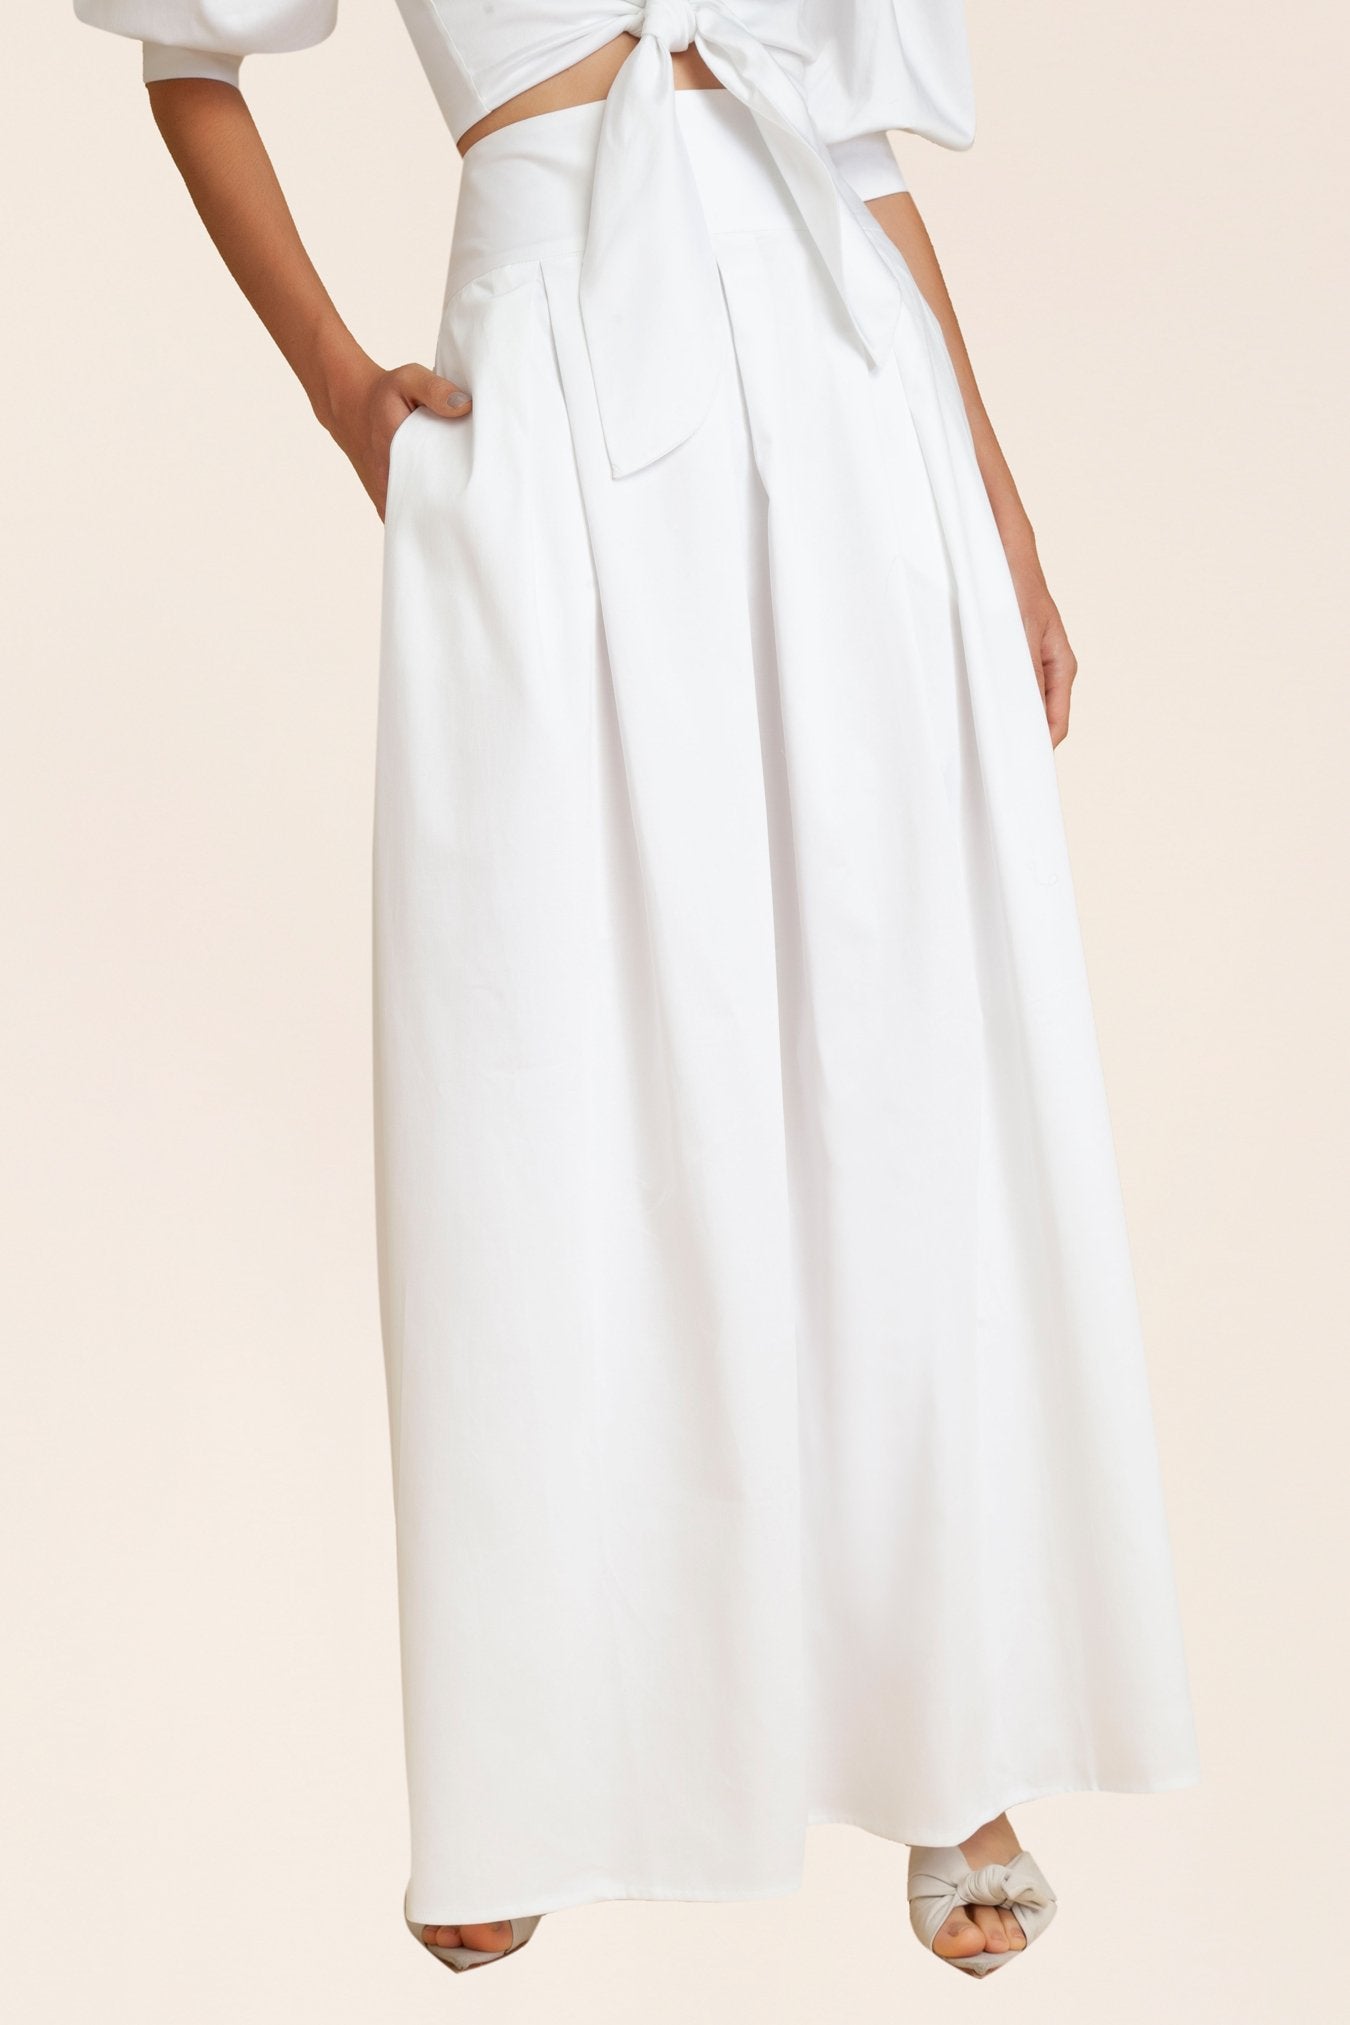 Solid Pleated Long Skirt Detail